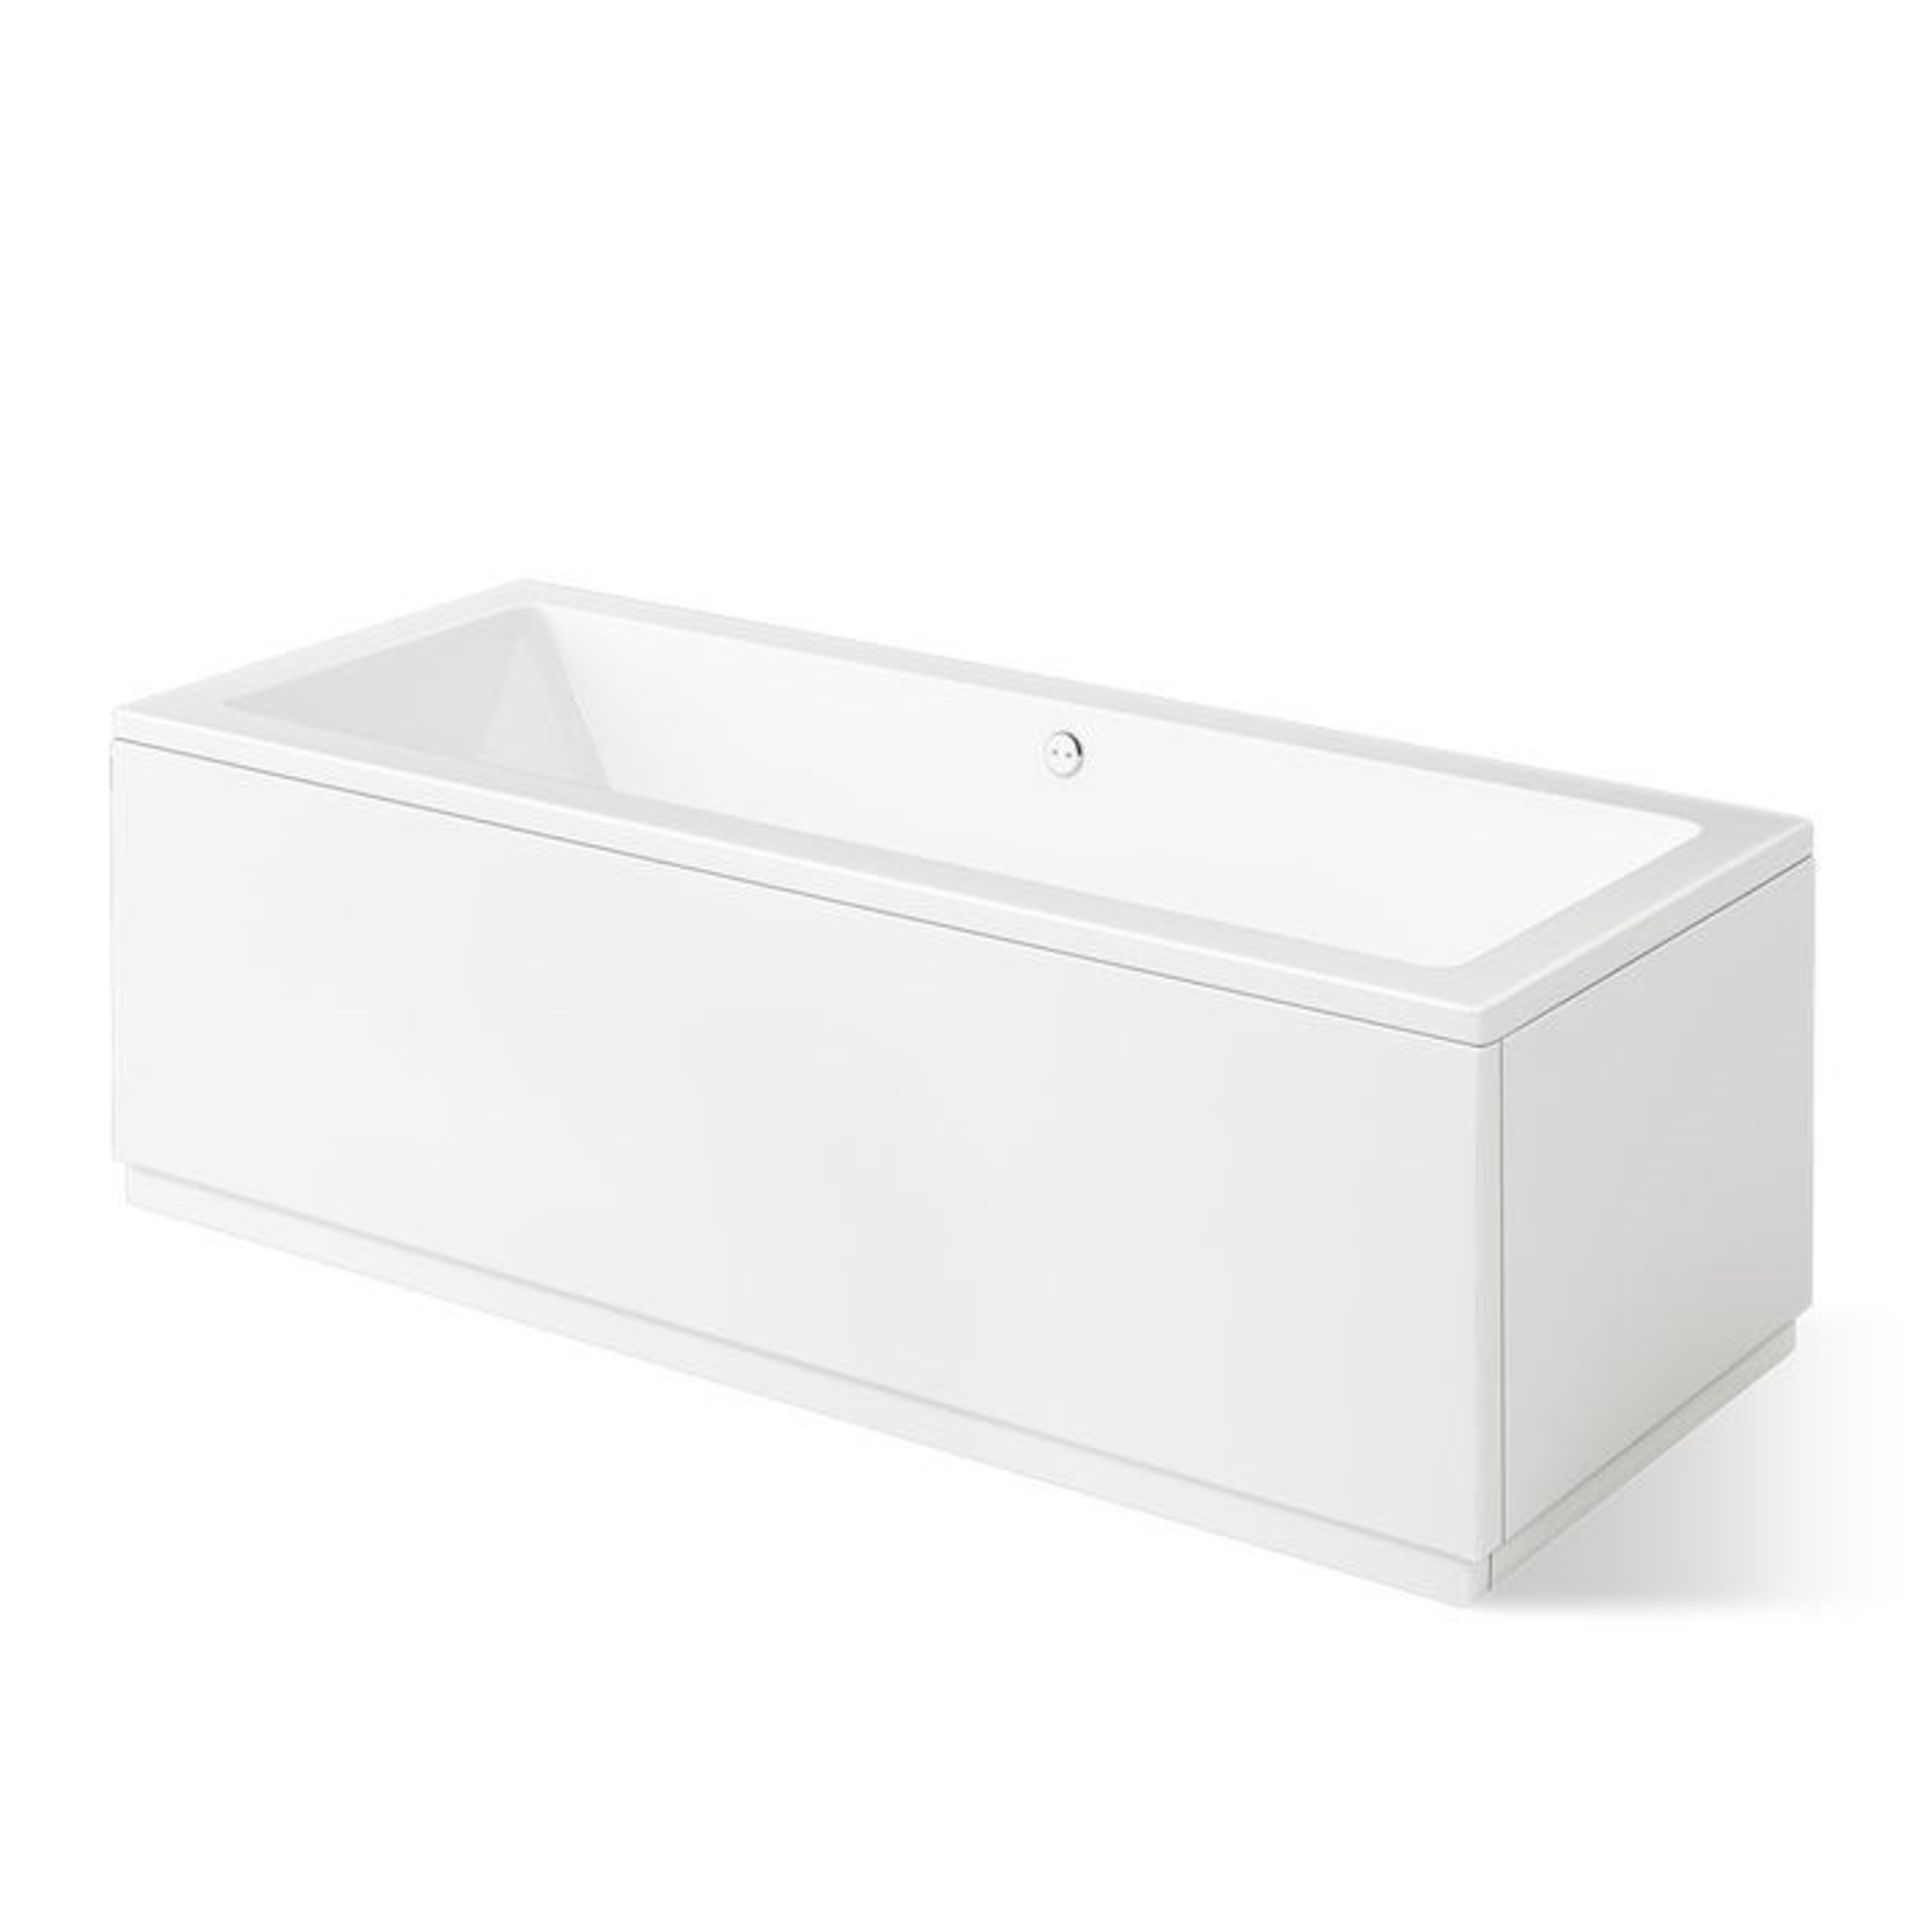 (RR19) 1700 X 750MM Square Double Ended Bath. We love this bath because it is perfect for - Image 4 of 4